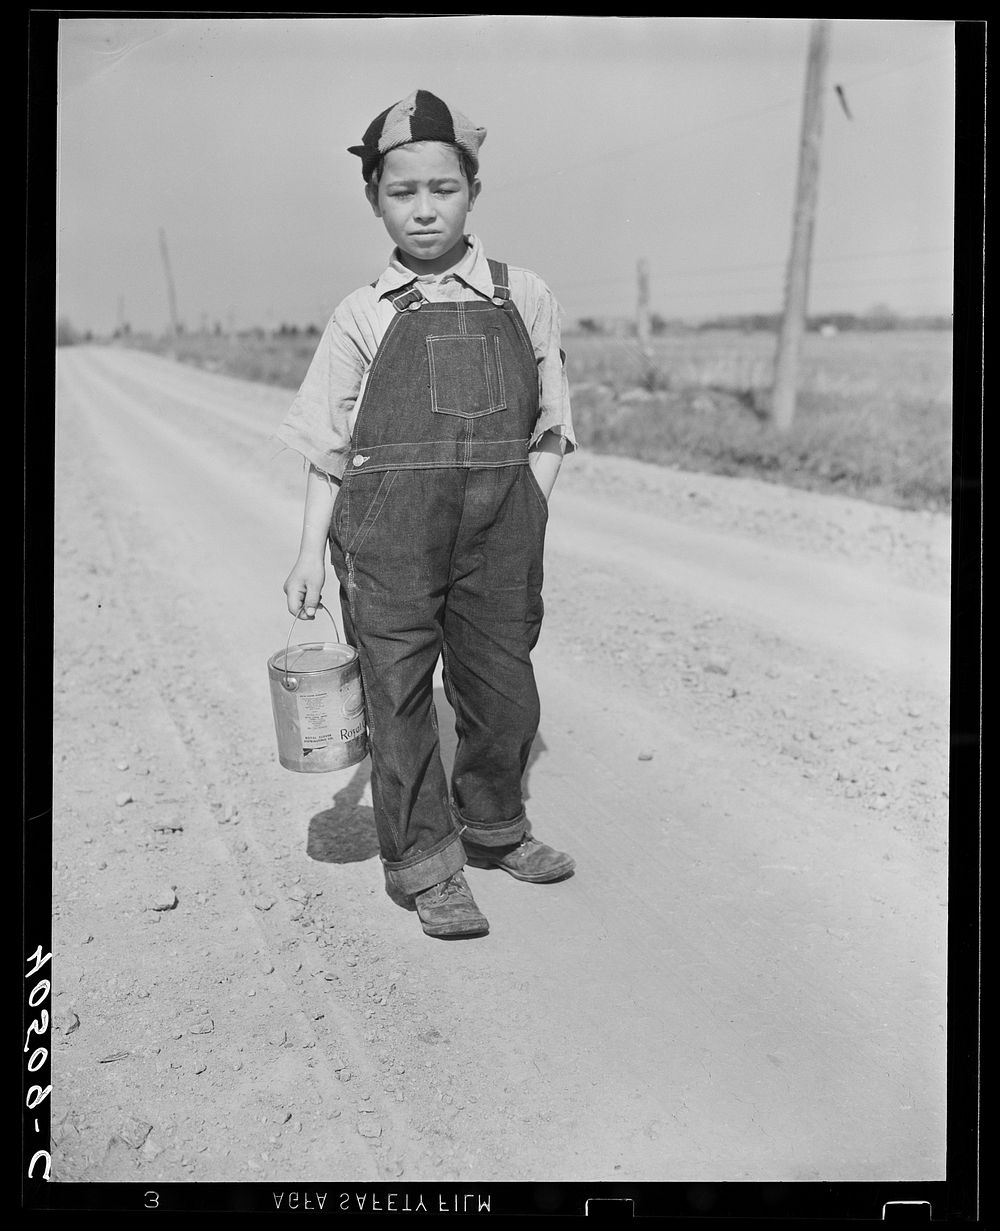 Boy on way home from school. Can contains his lunch. Near Sterling, Virginia. Sourced from the Library of Congress.